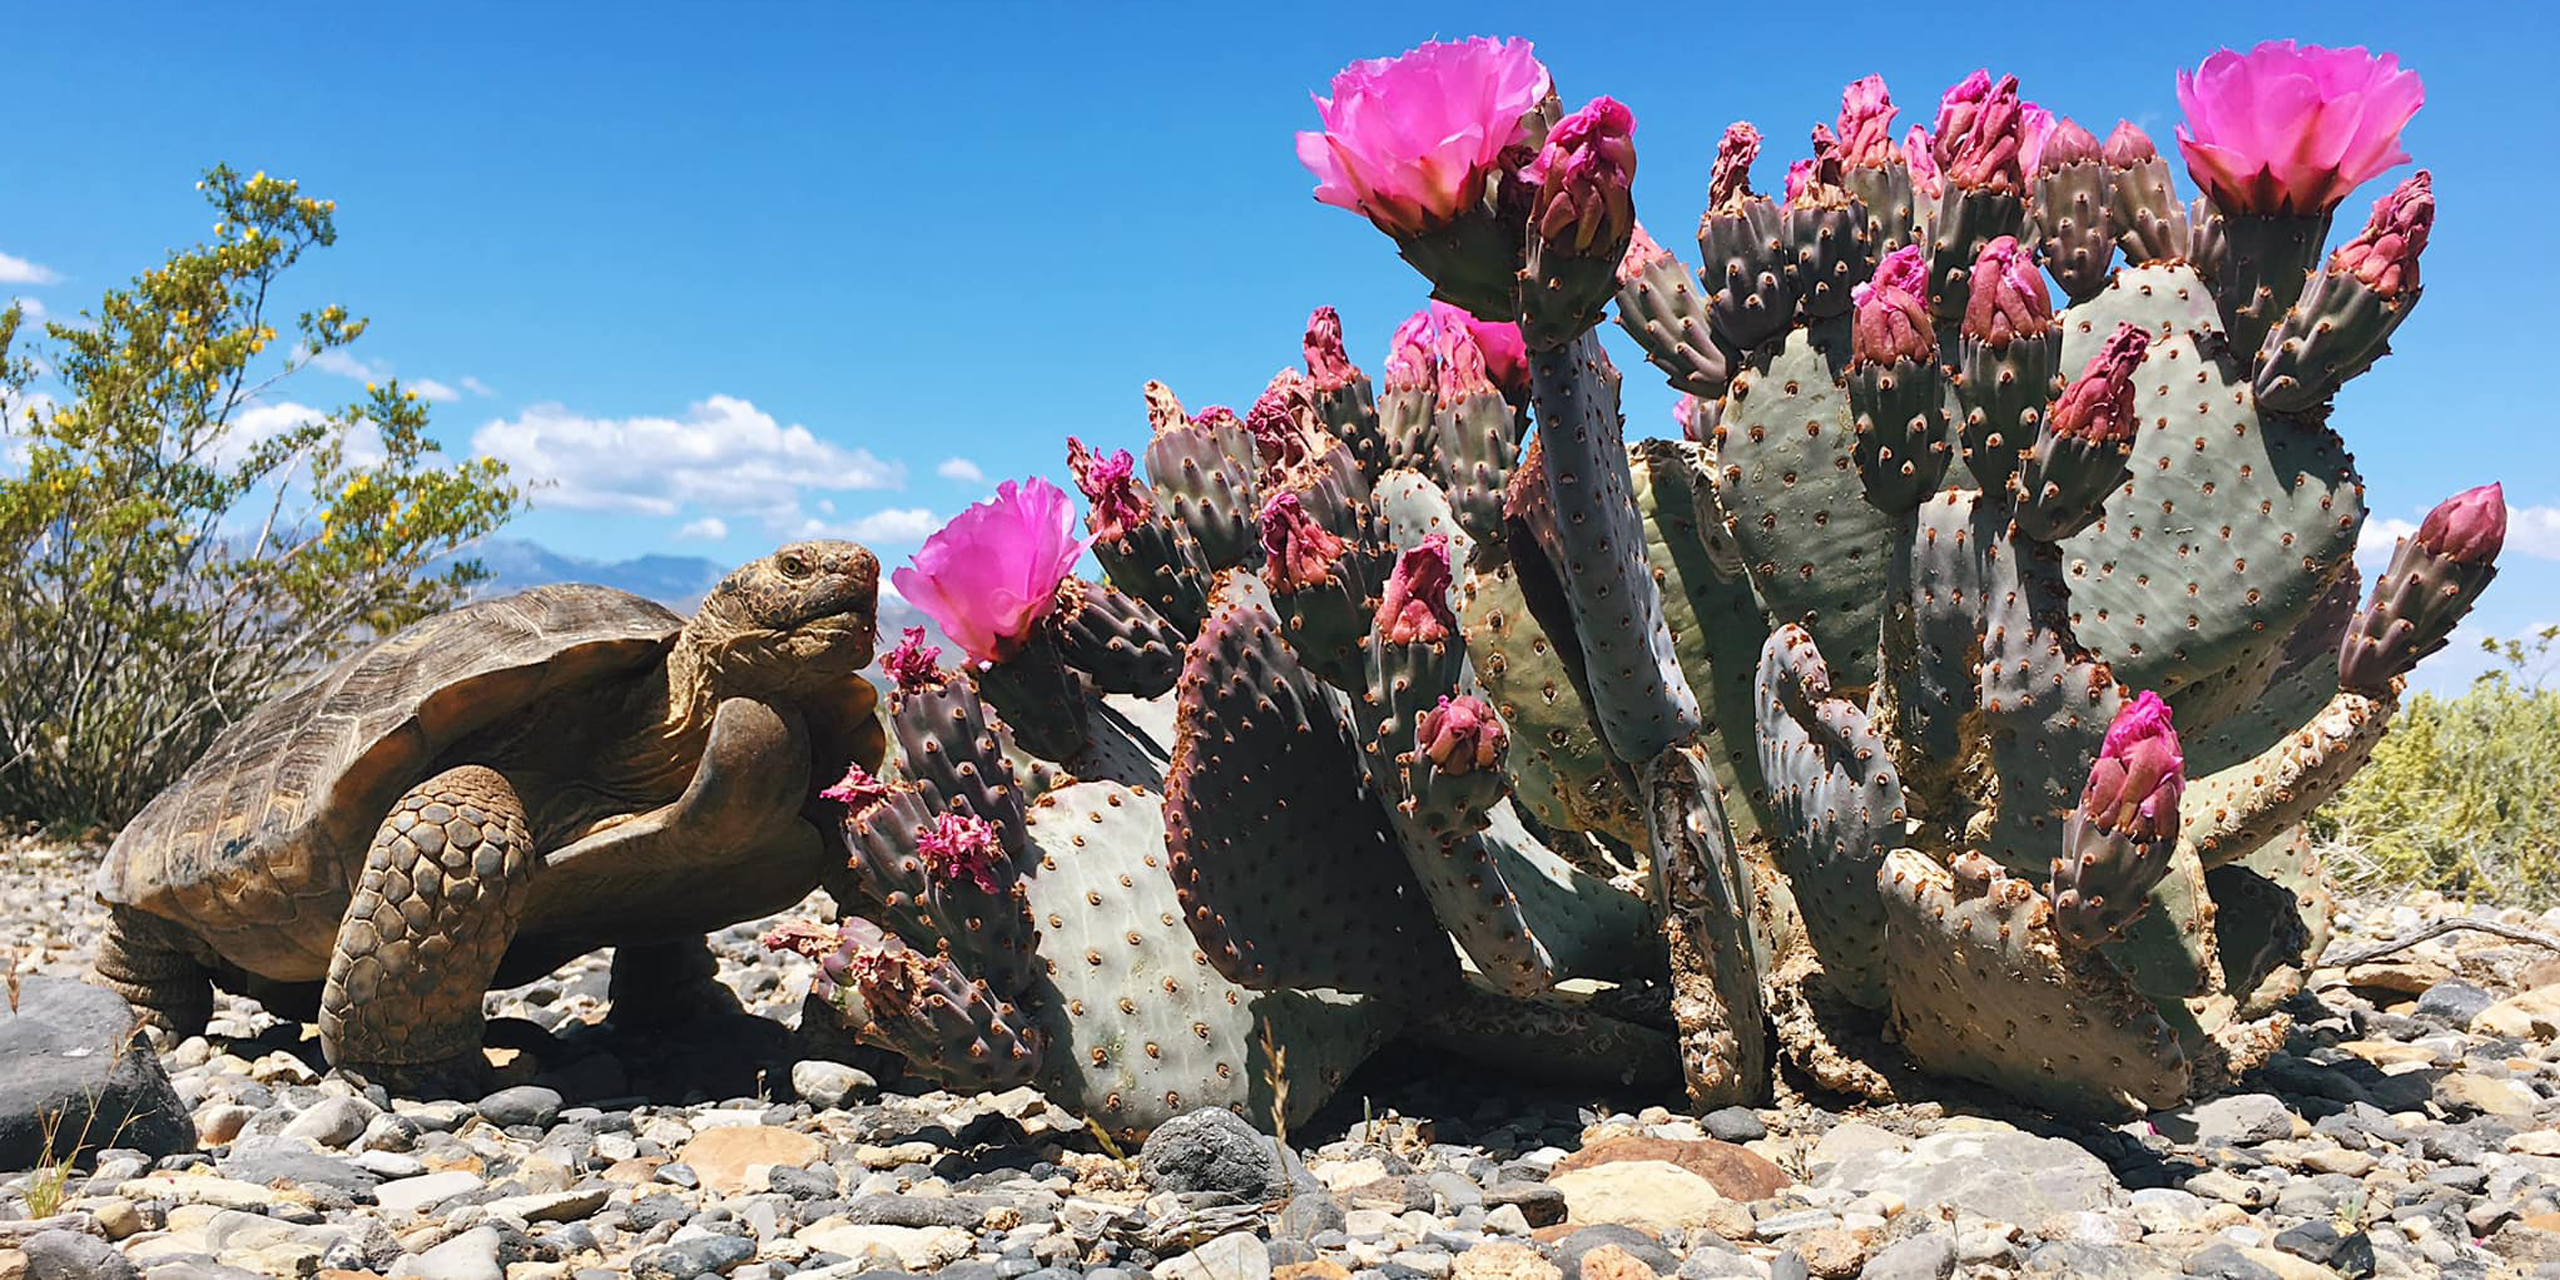 Desert Tortoise standing next to a blooming prickly pear cactus with pink flowers